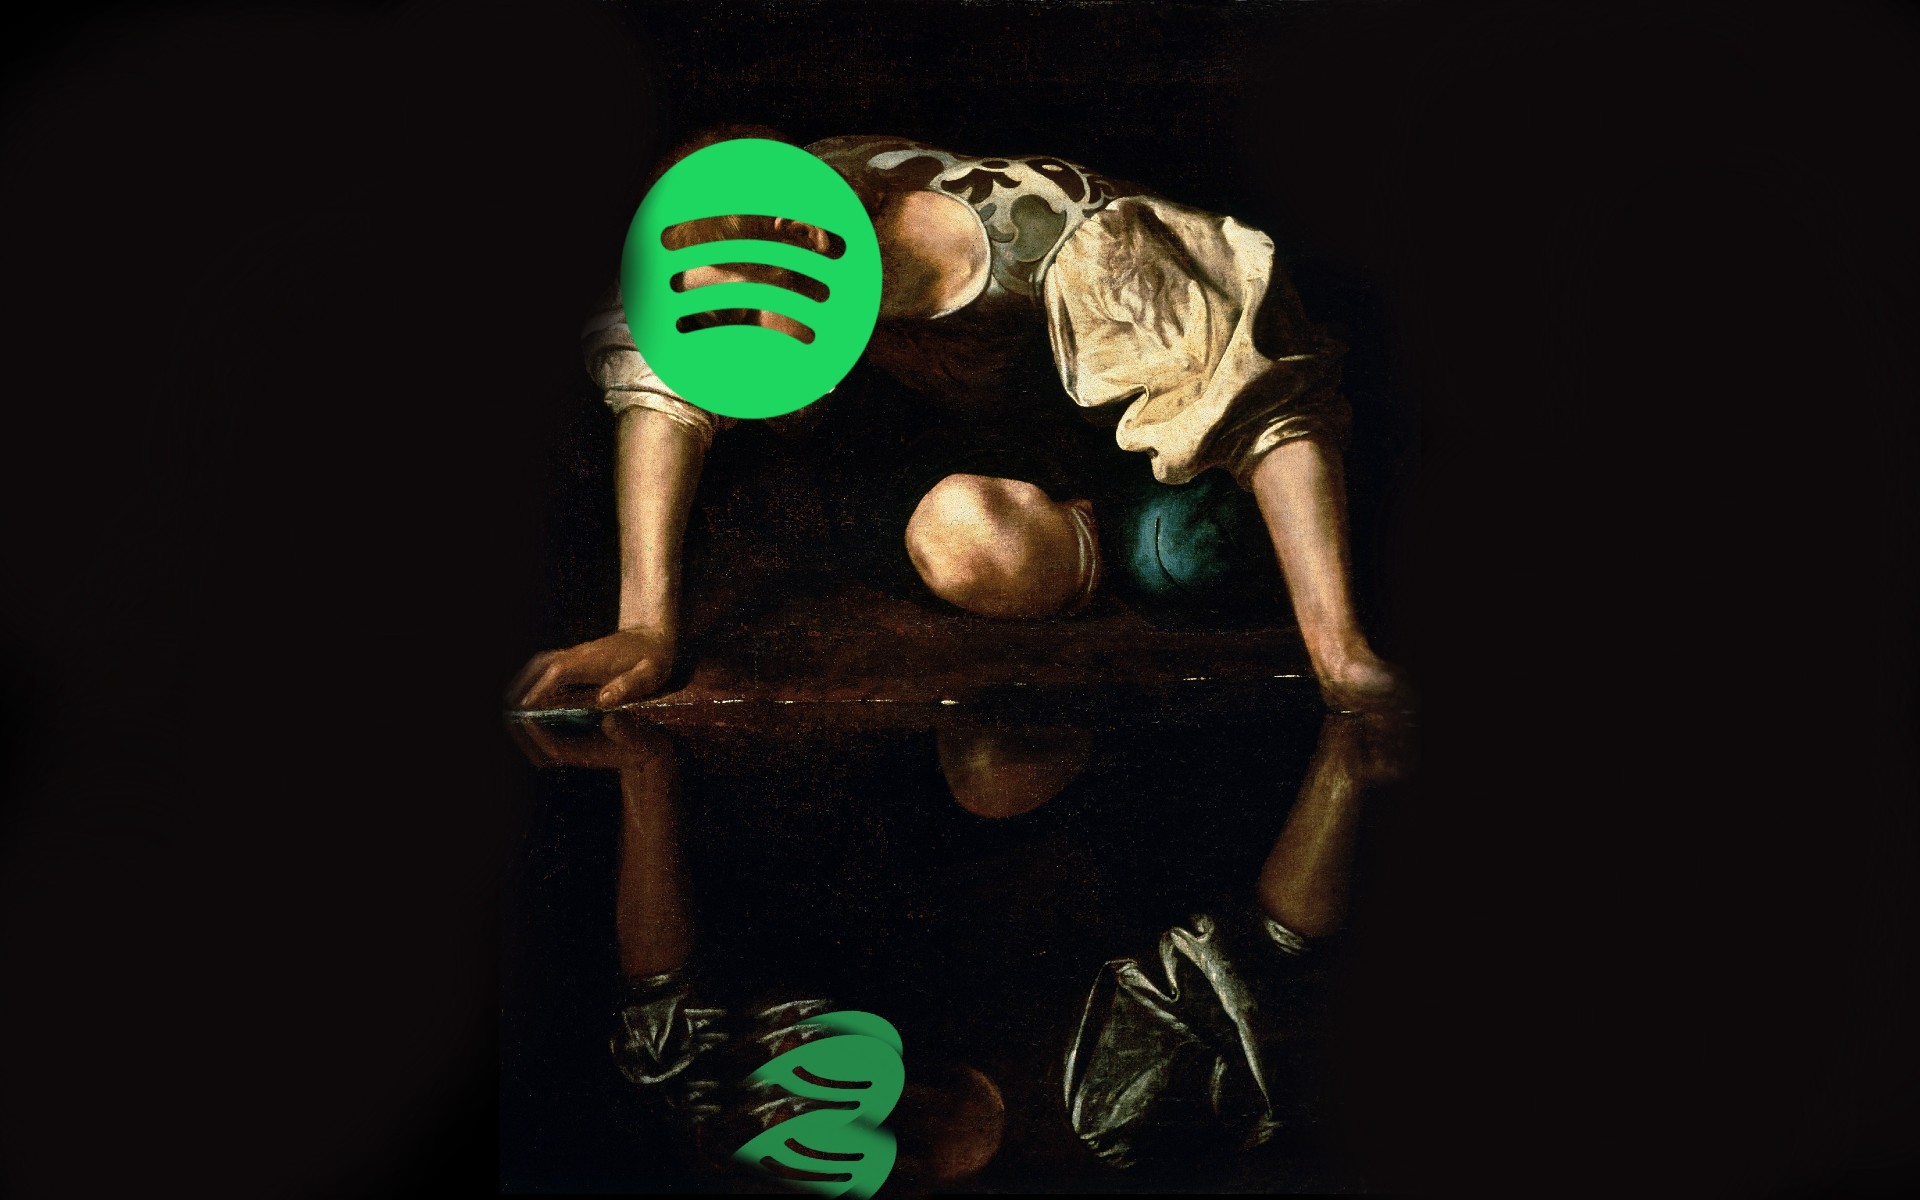 artist's rendering of Caravaggio's painting of Narcissus with a spotify logo for a head